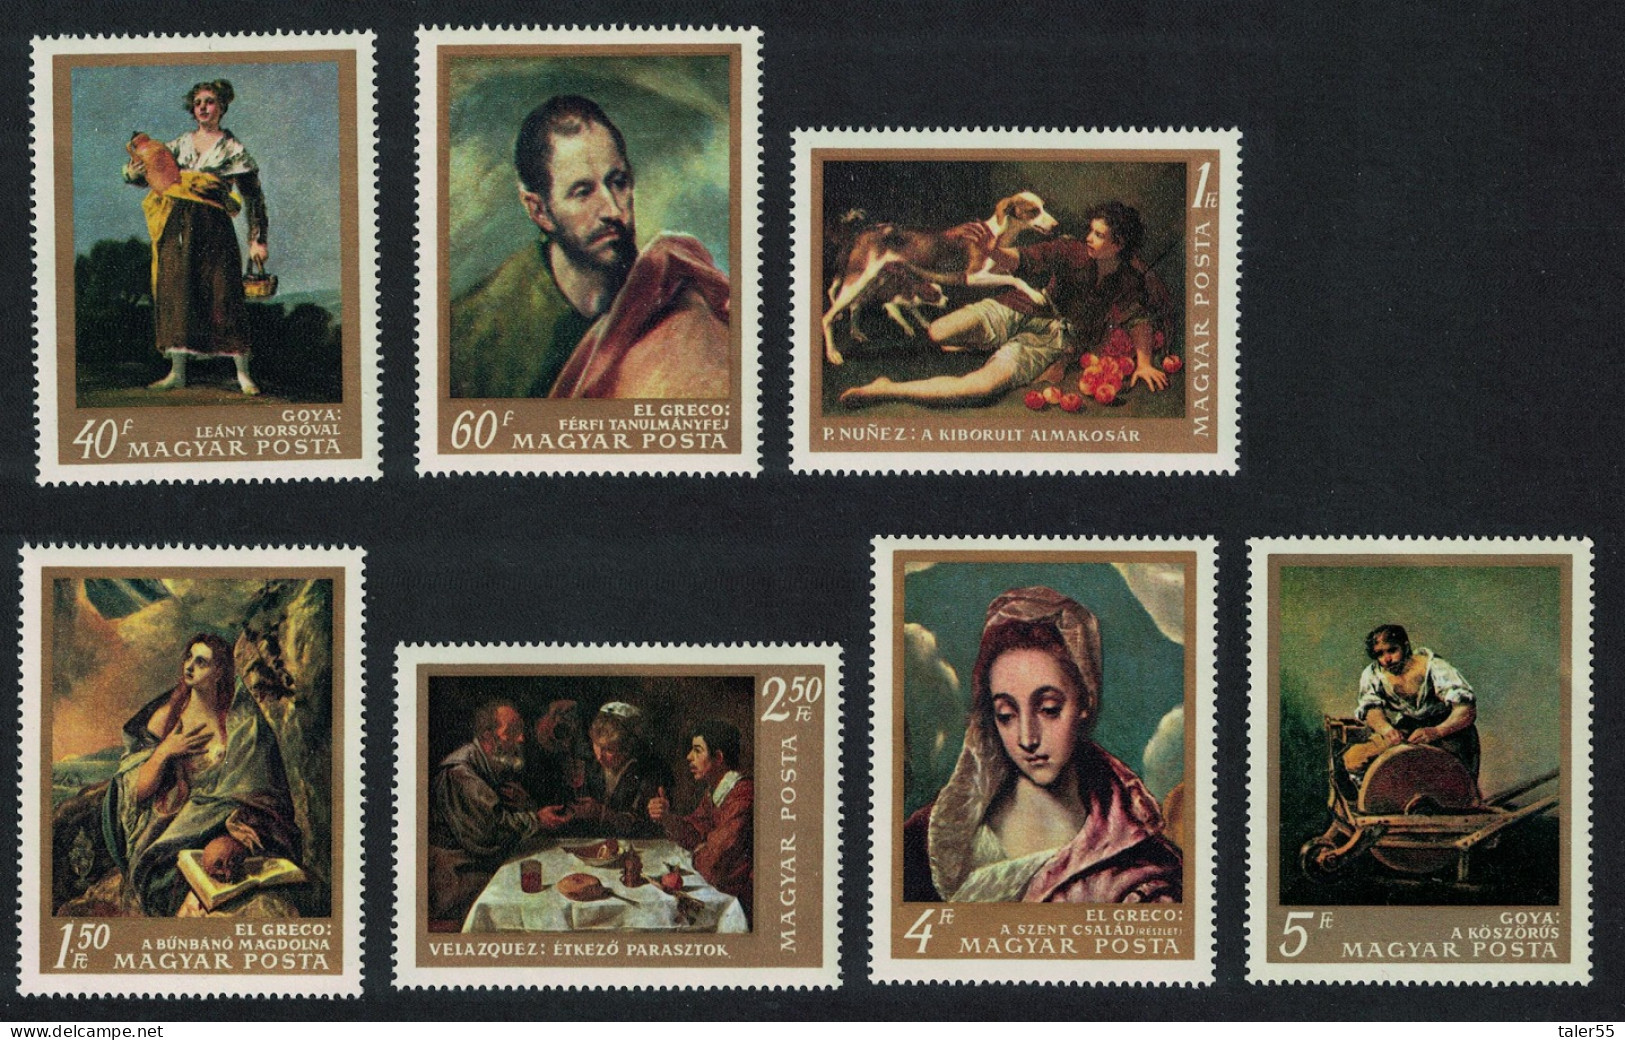 Hungary Paintings In National Gallery Budapest 4th Series Def 1968 SG#2357-2363 - Used Stamps